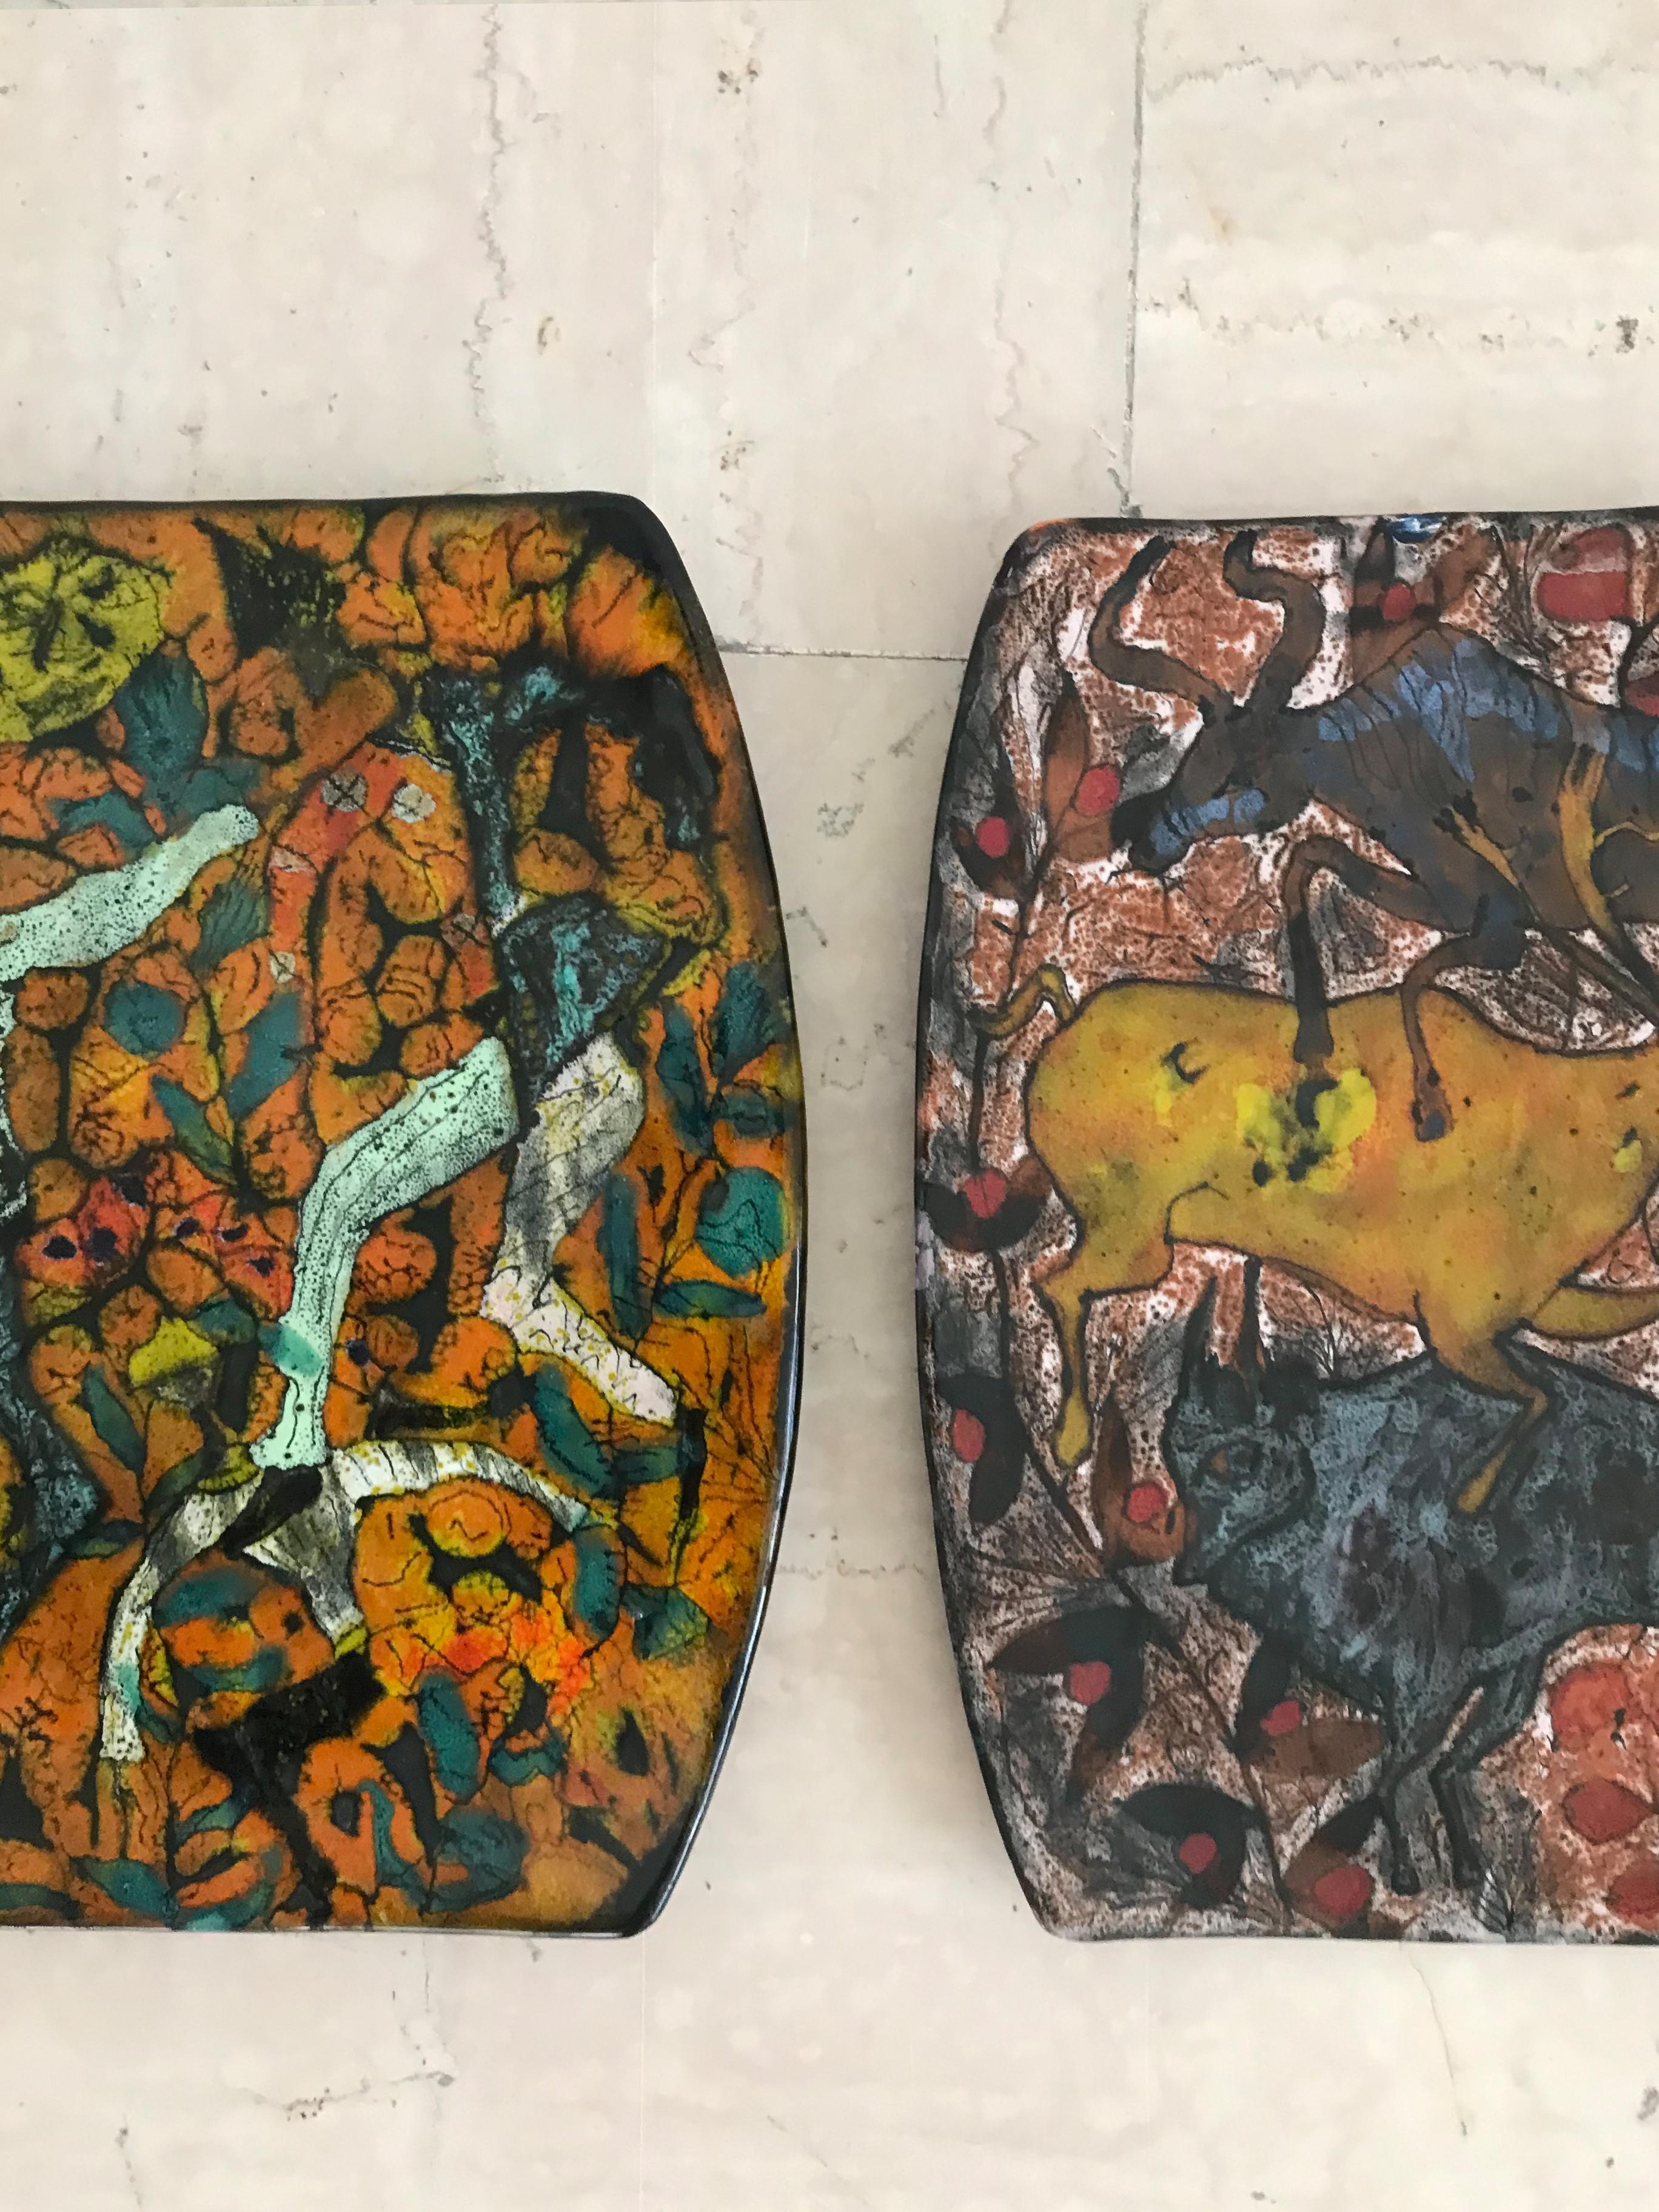 Pair of Italian ceramic wall tile plates designed by Italian artist Elio Schiavon Venezia with graffito decoration depicting figures and animals, mark engraved on both backs of tiles, Italy 1960s.

The ceramic tiles are original to the period and